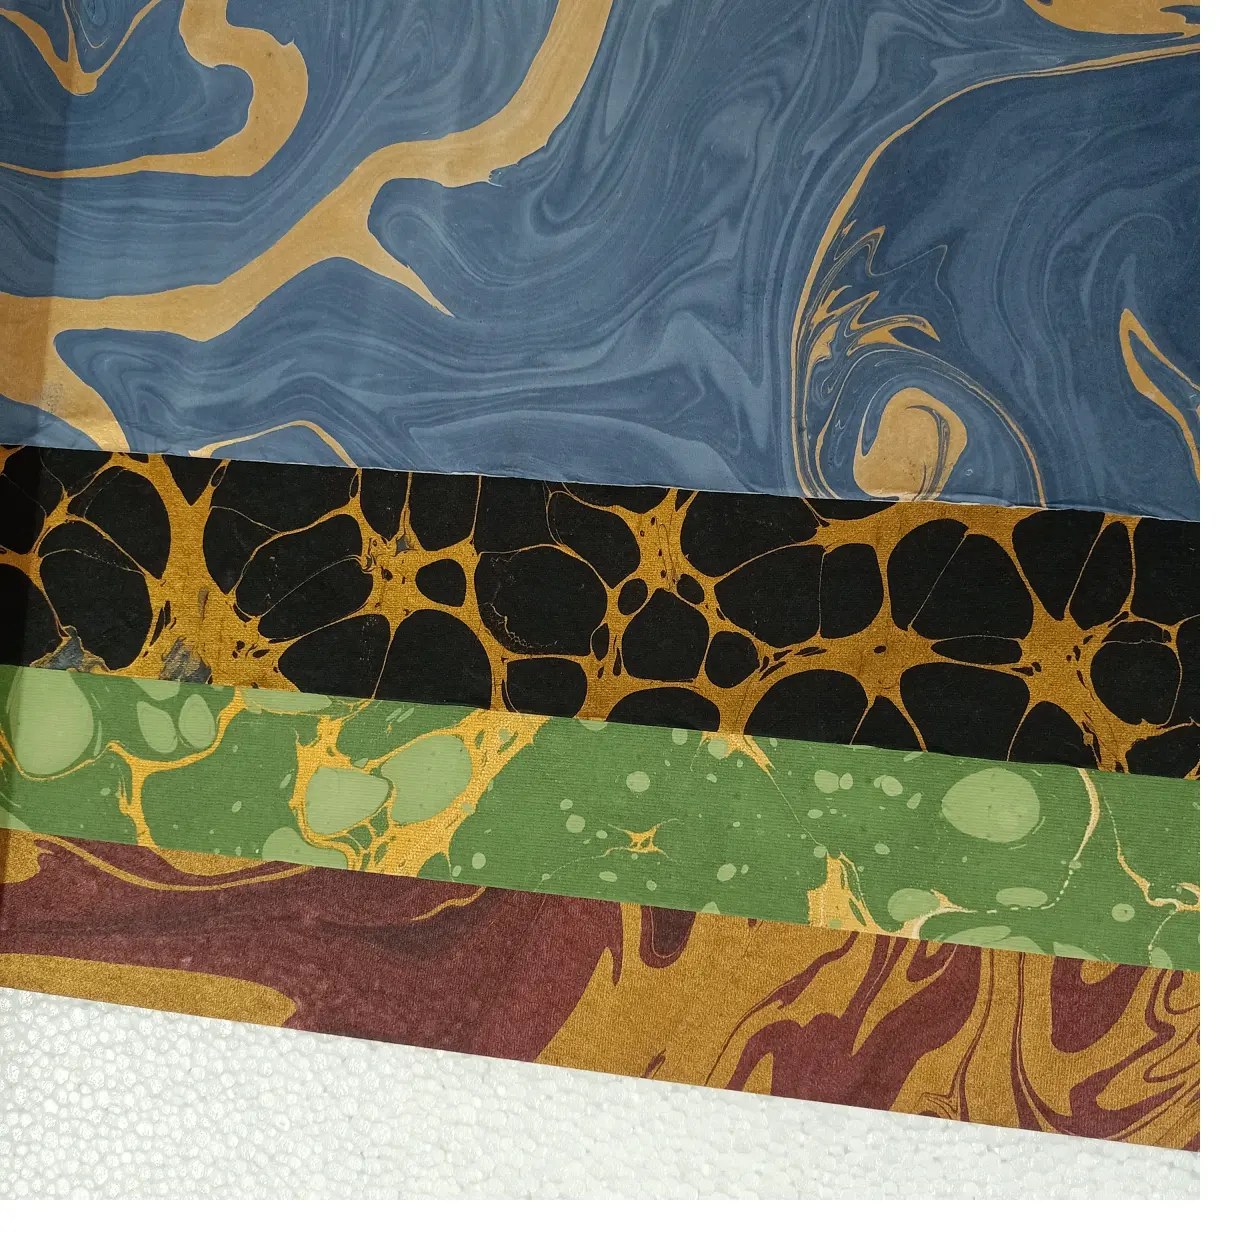 custom made marble printed papers in assorted patterns and colorways ideal for gift wrapping and suitable for resale